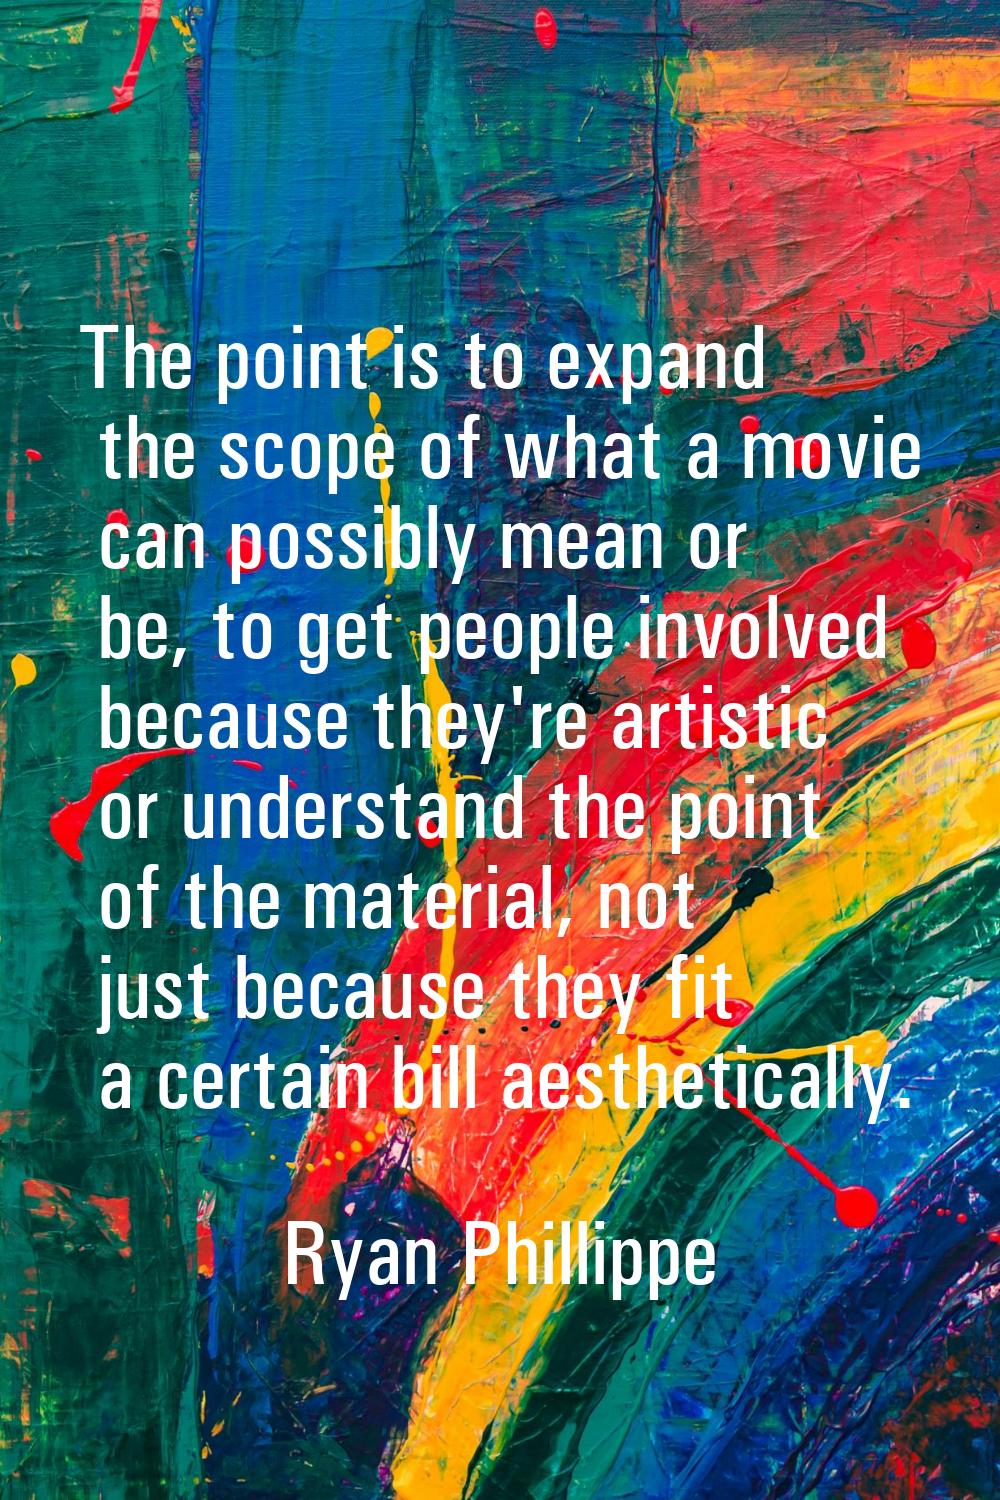 The point is to expand the scope of what a movie can possibly mean or be, to get people involved be